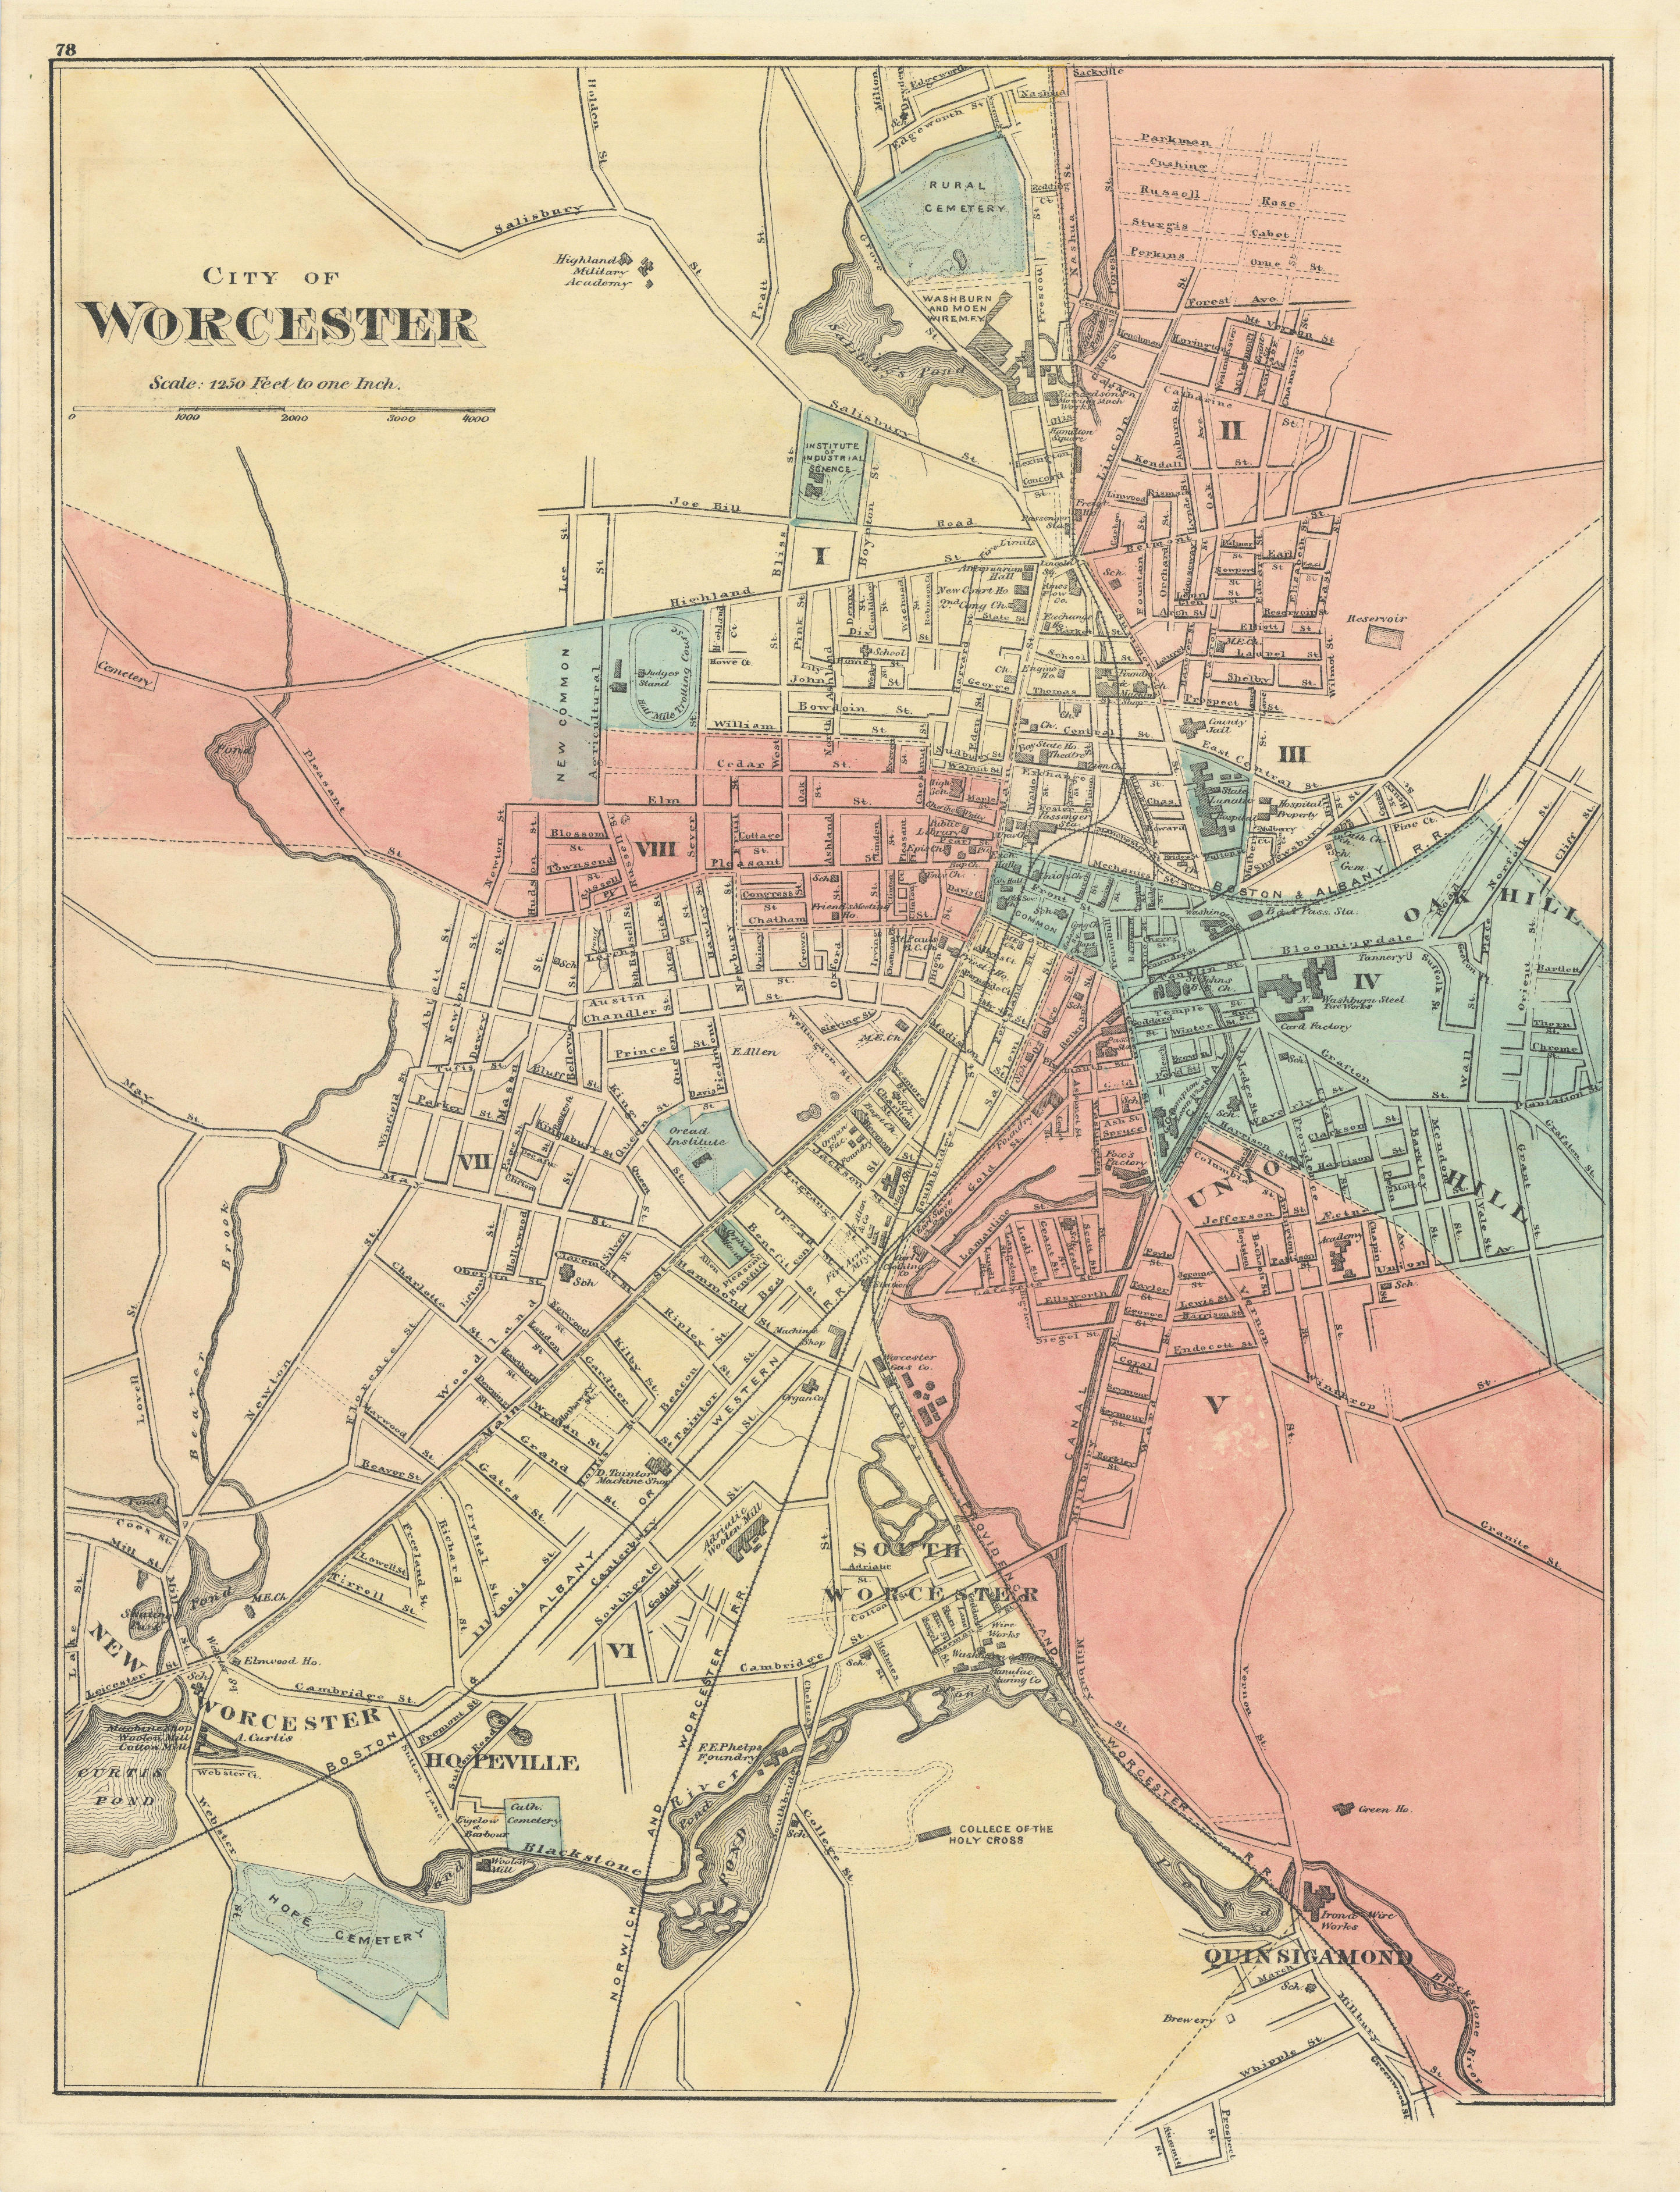 City of Worcester, Massachusetts. Town plan. WALLING & GRAY 1871 old map